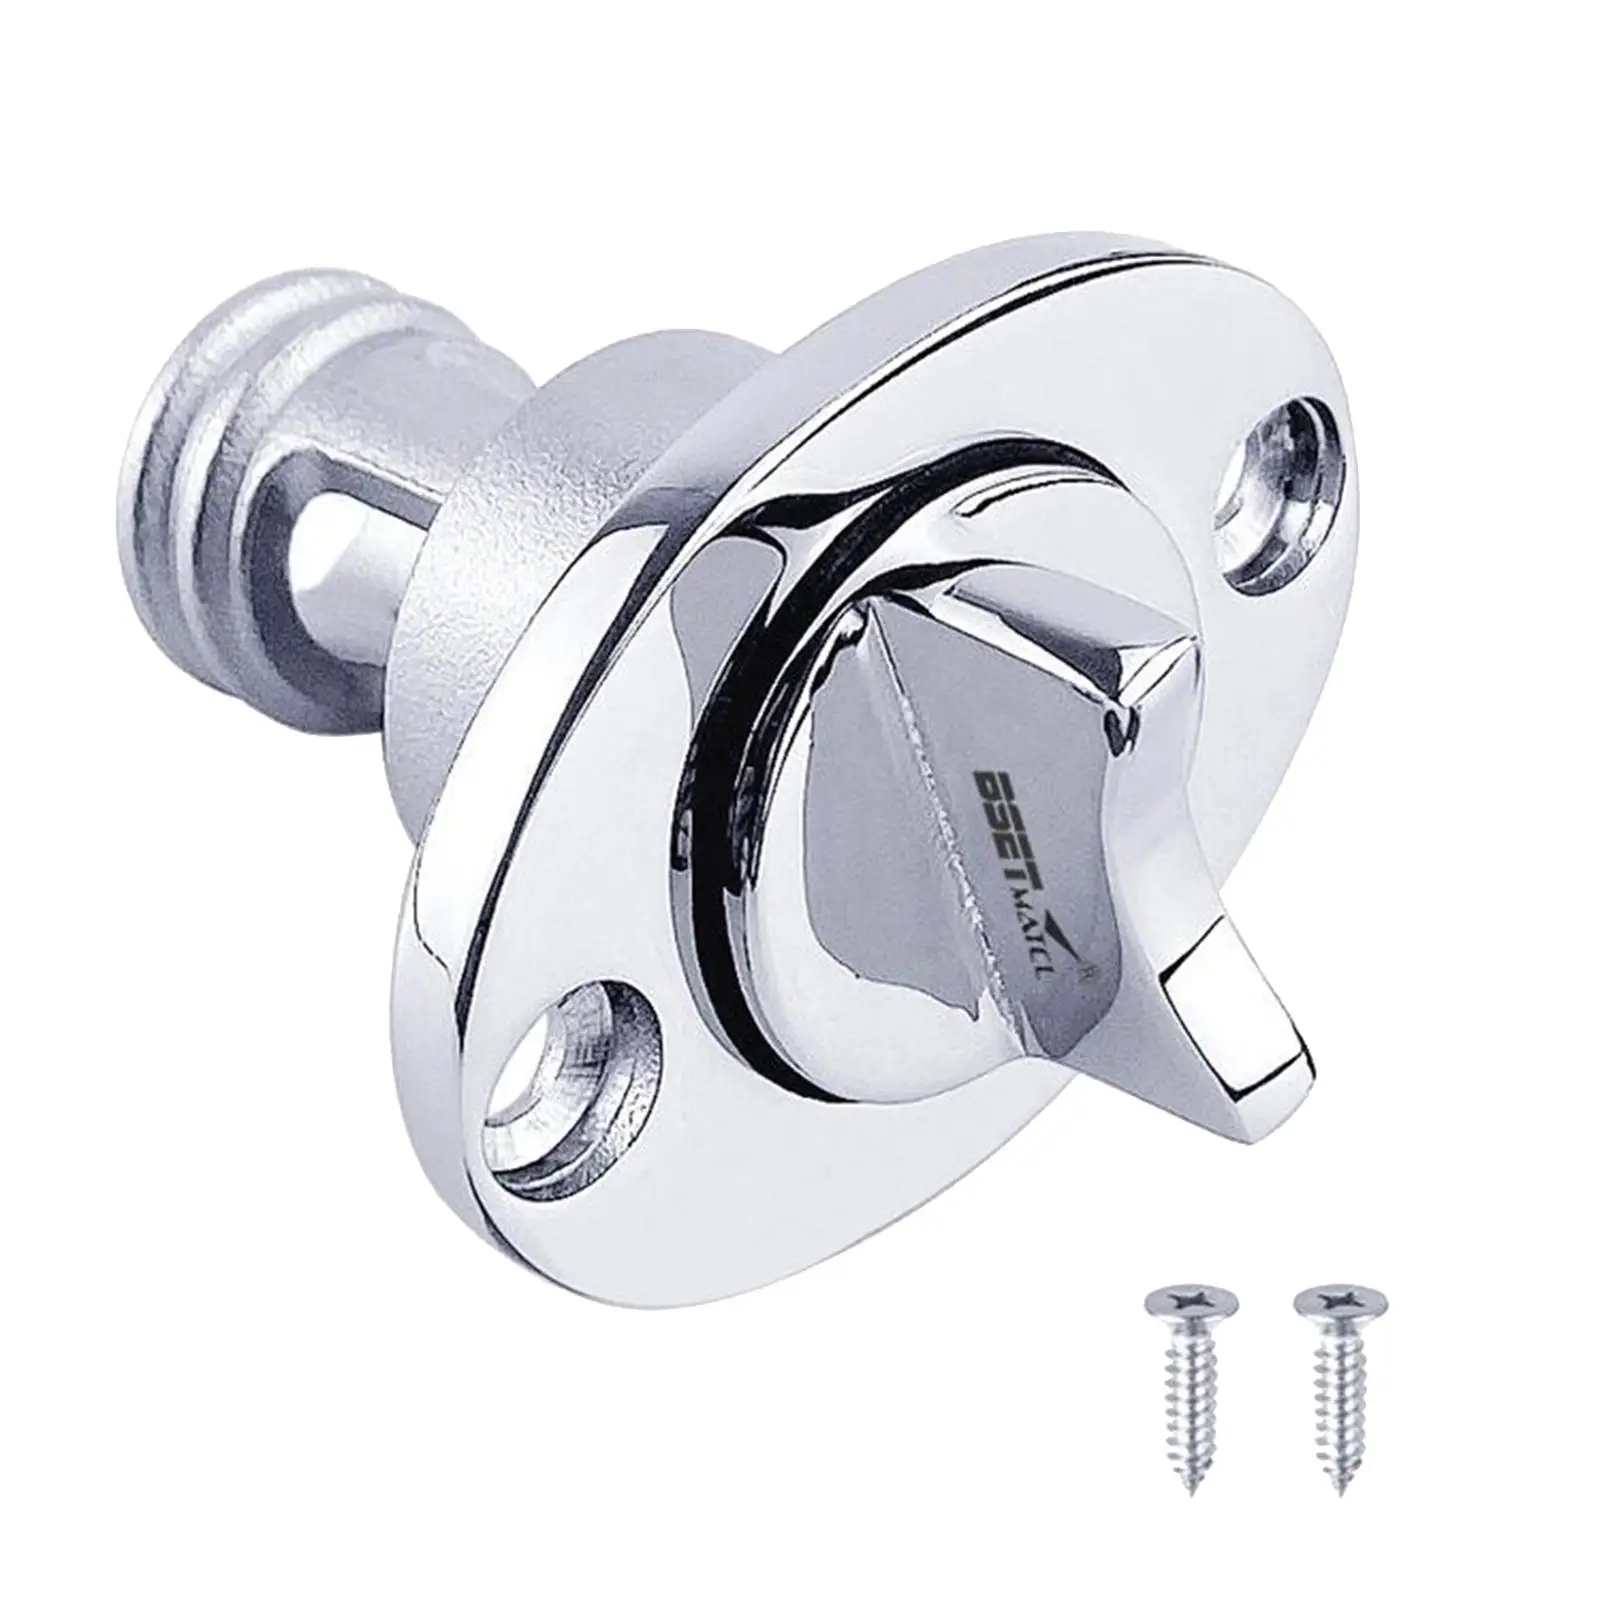 Stainless Steel  Stern Stern Hardware Accessories   Drain Plug for